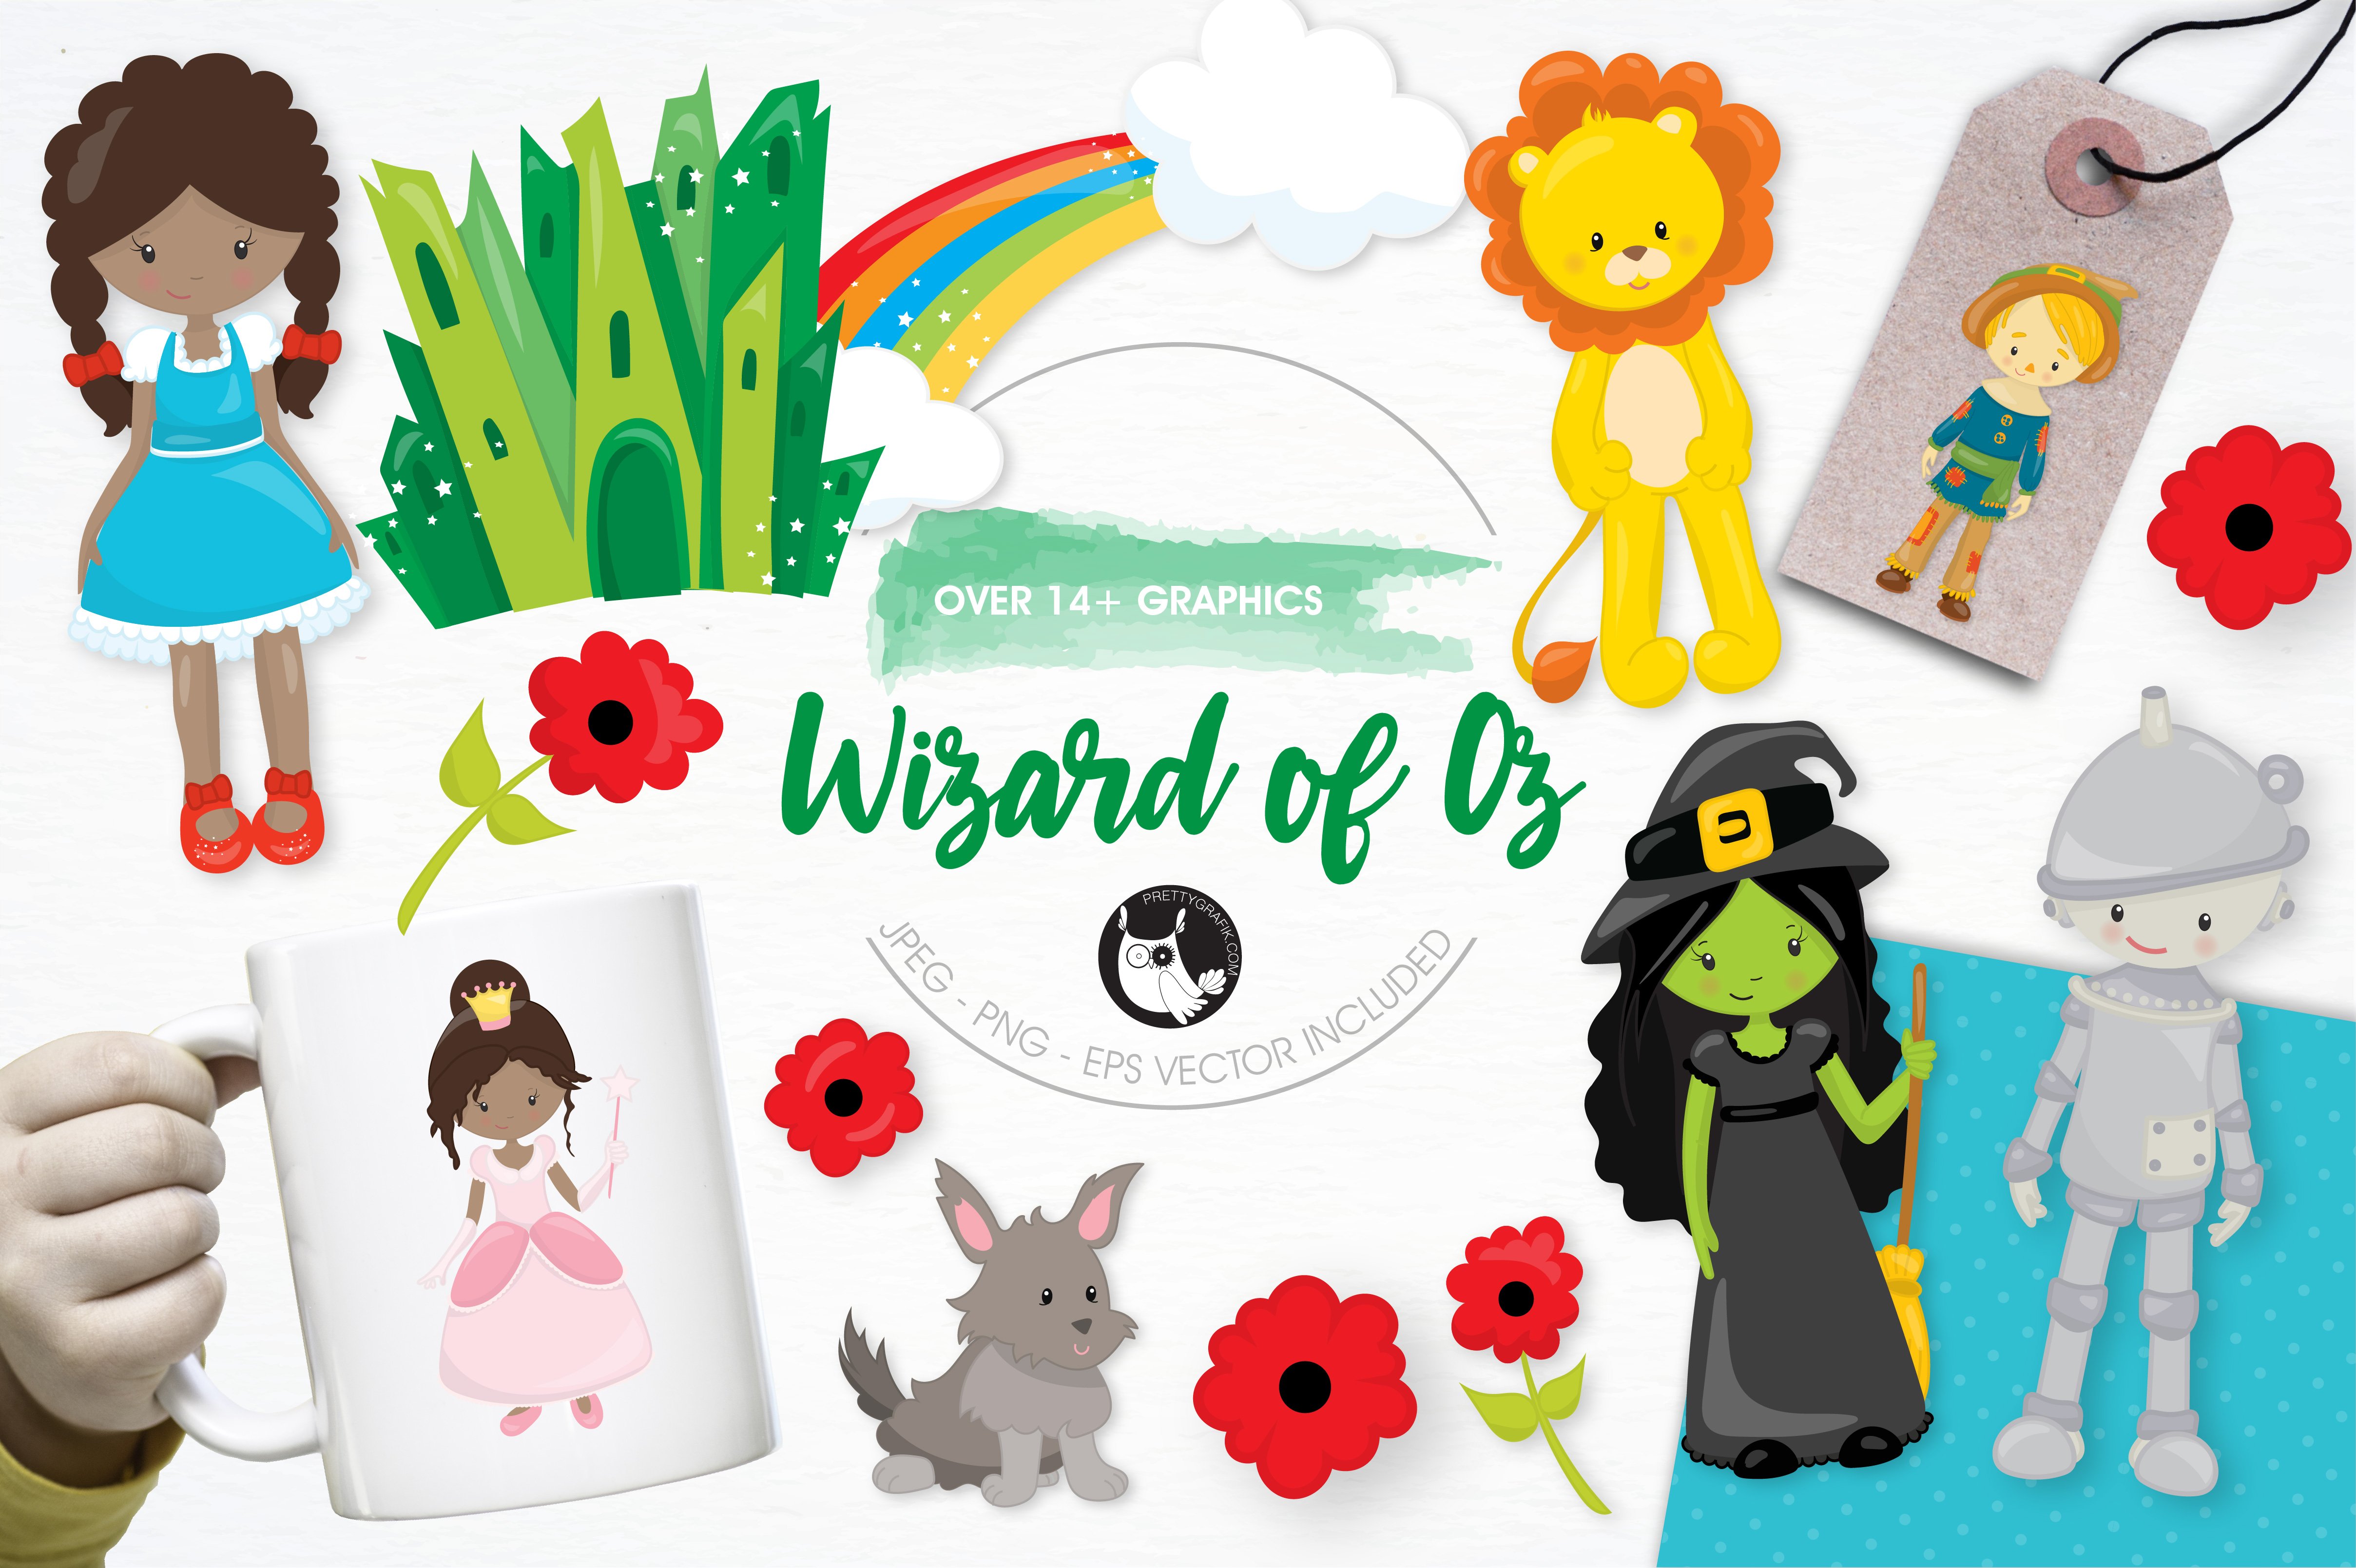 Wizard of Oz Illustration Pack - Vector Image